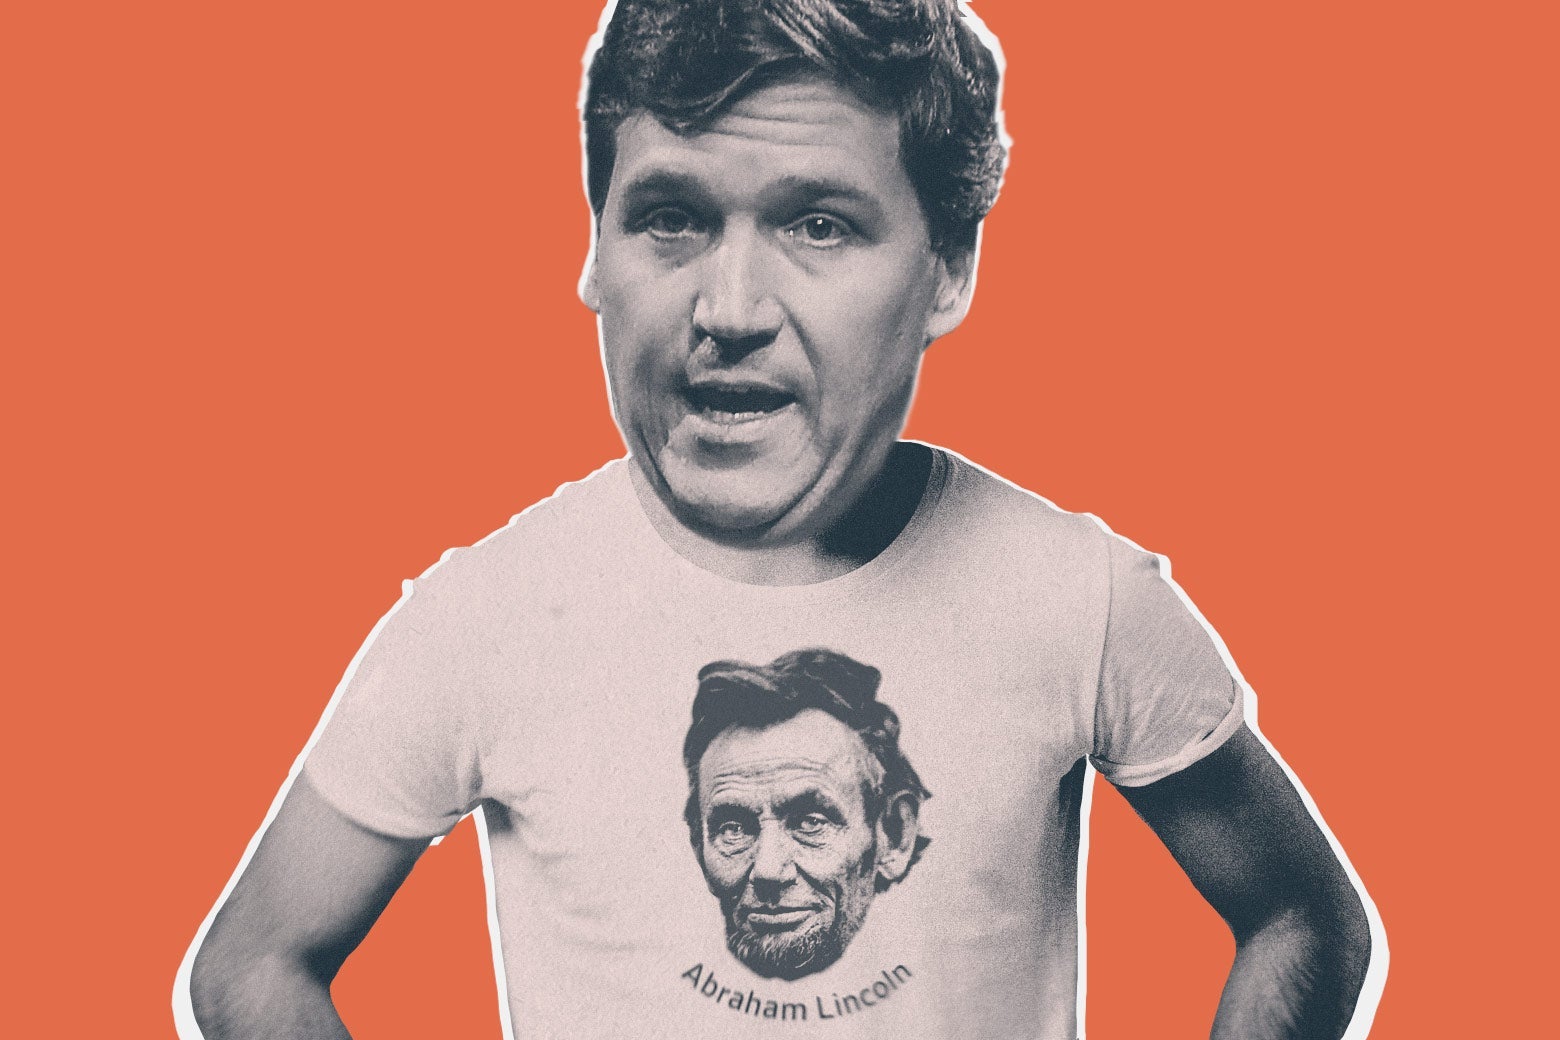 Tucker Carlson's head photoshopped on the body of a guy wearing a white T-shirt with Abraham Lincoln's face on it